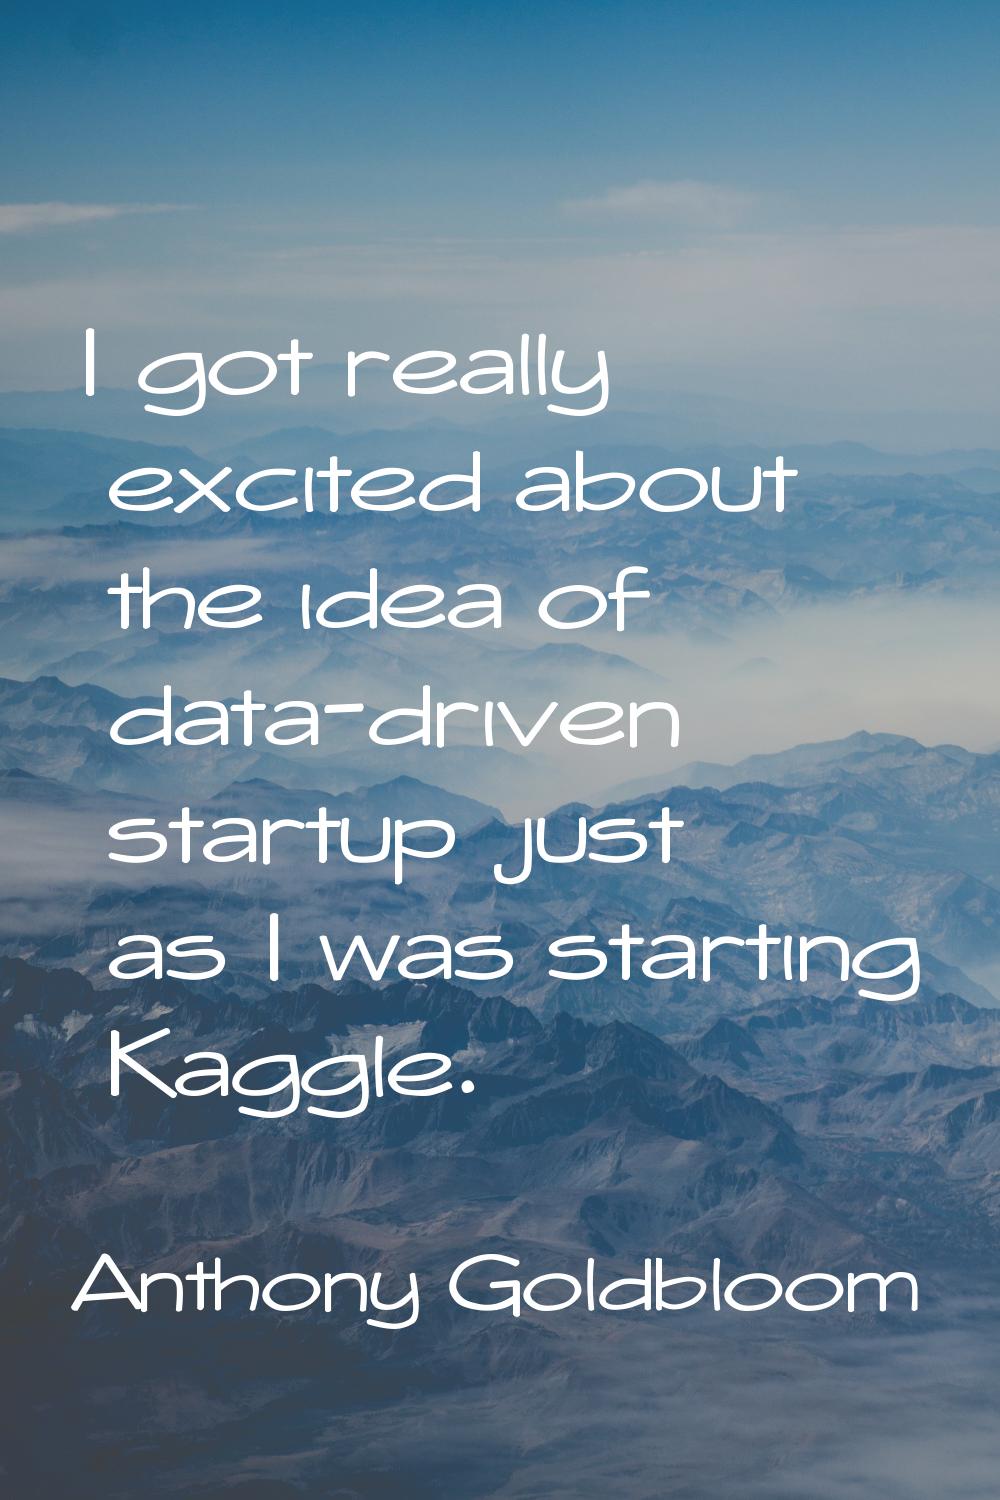 I got really excited about the idea of data-driven startup just as I was starting Kaggle.